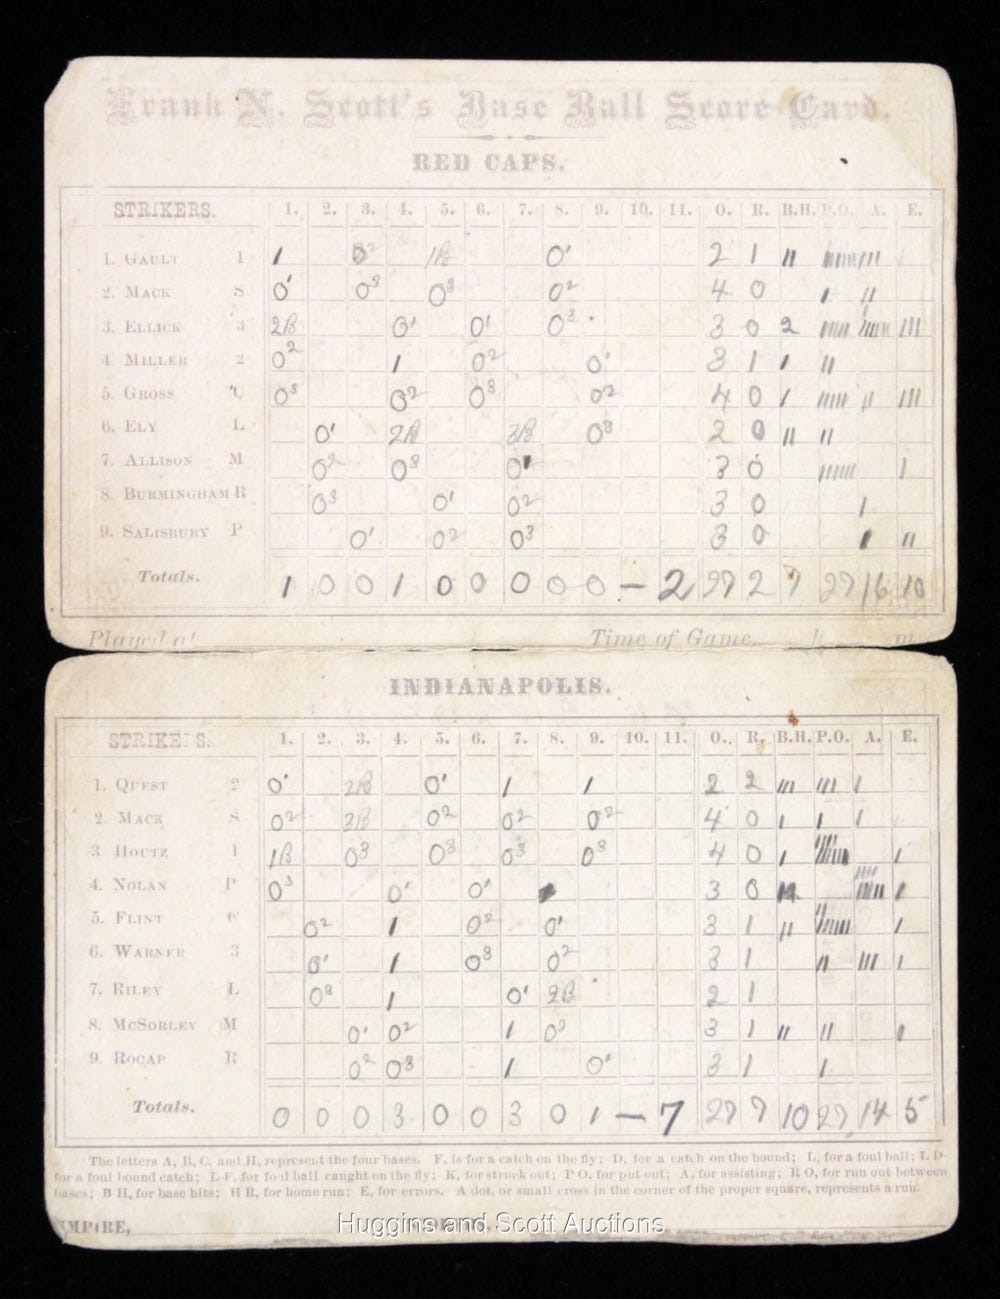 A Pictorial Chronology of Baseball in the 19th Century: Part 6